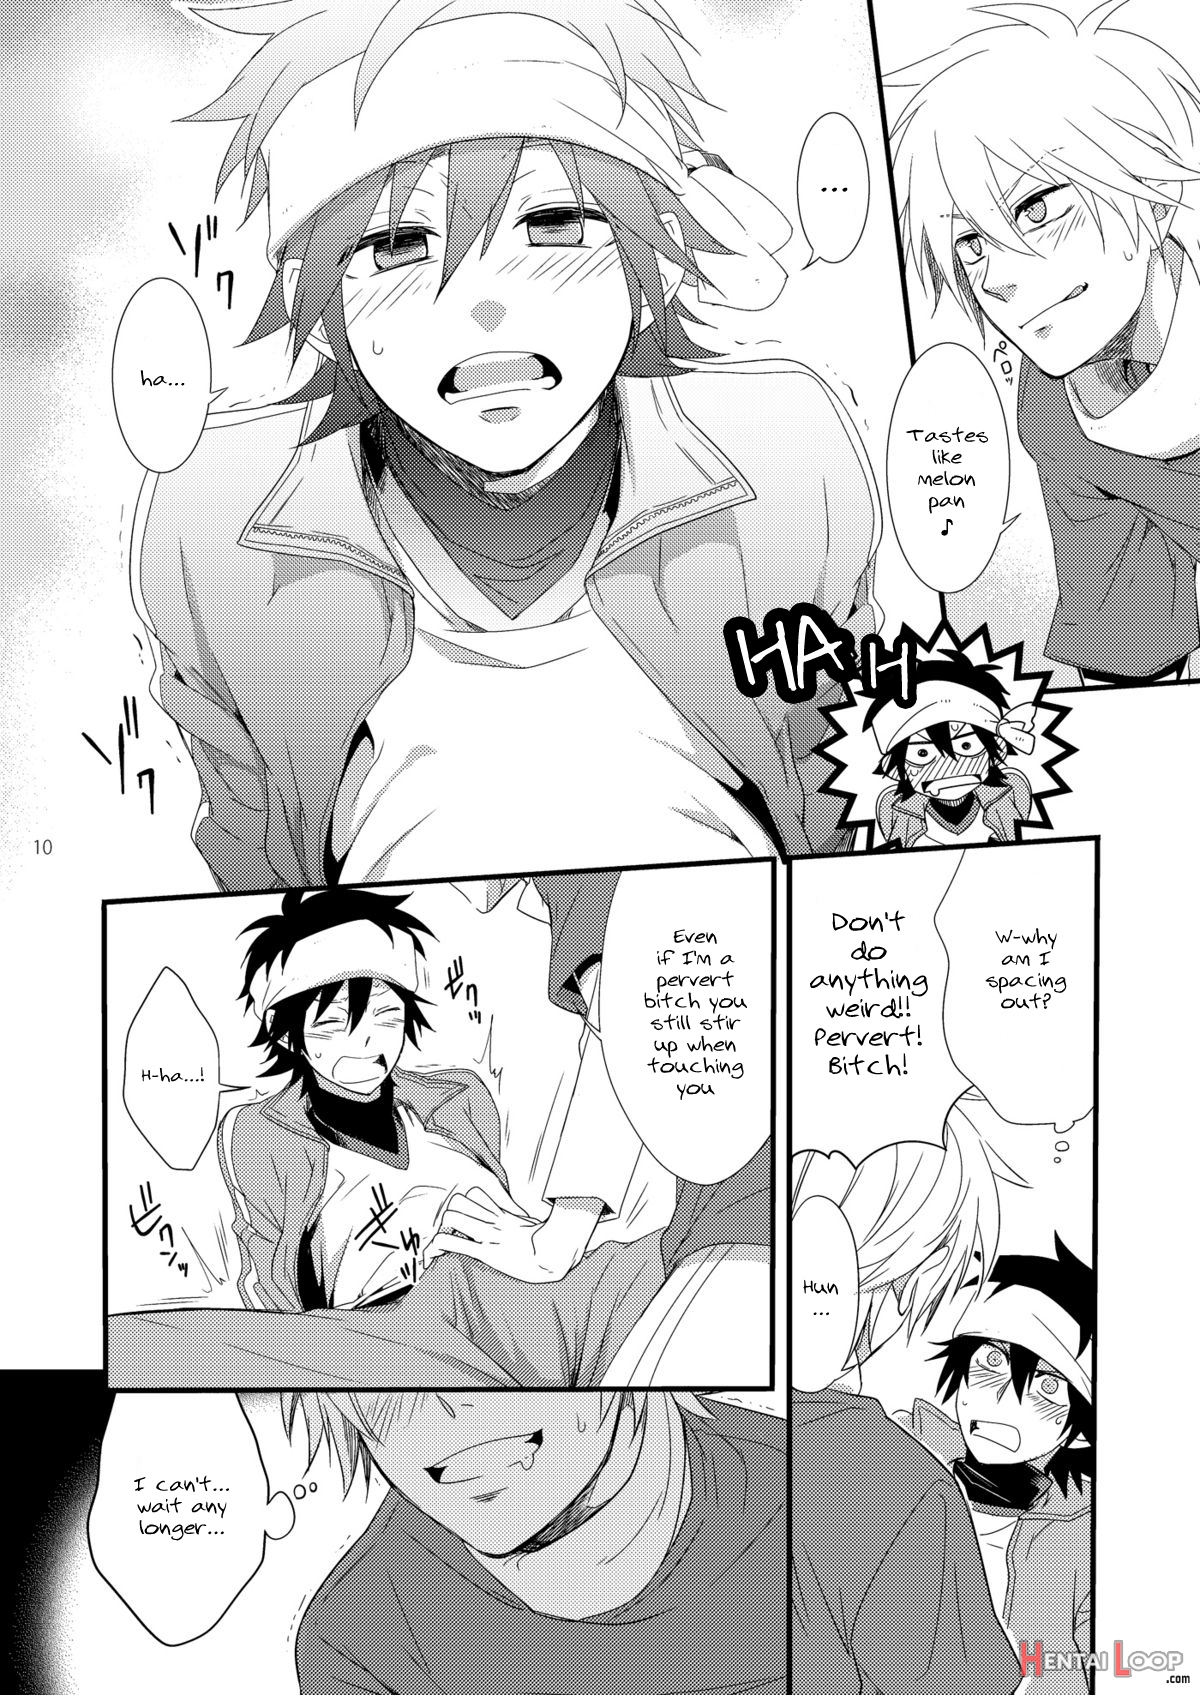 Hajime-sensei And The Adult Health And Physical Education 2 page 9